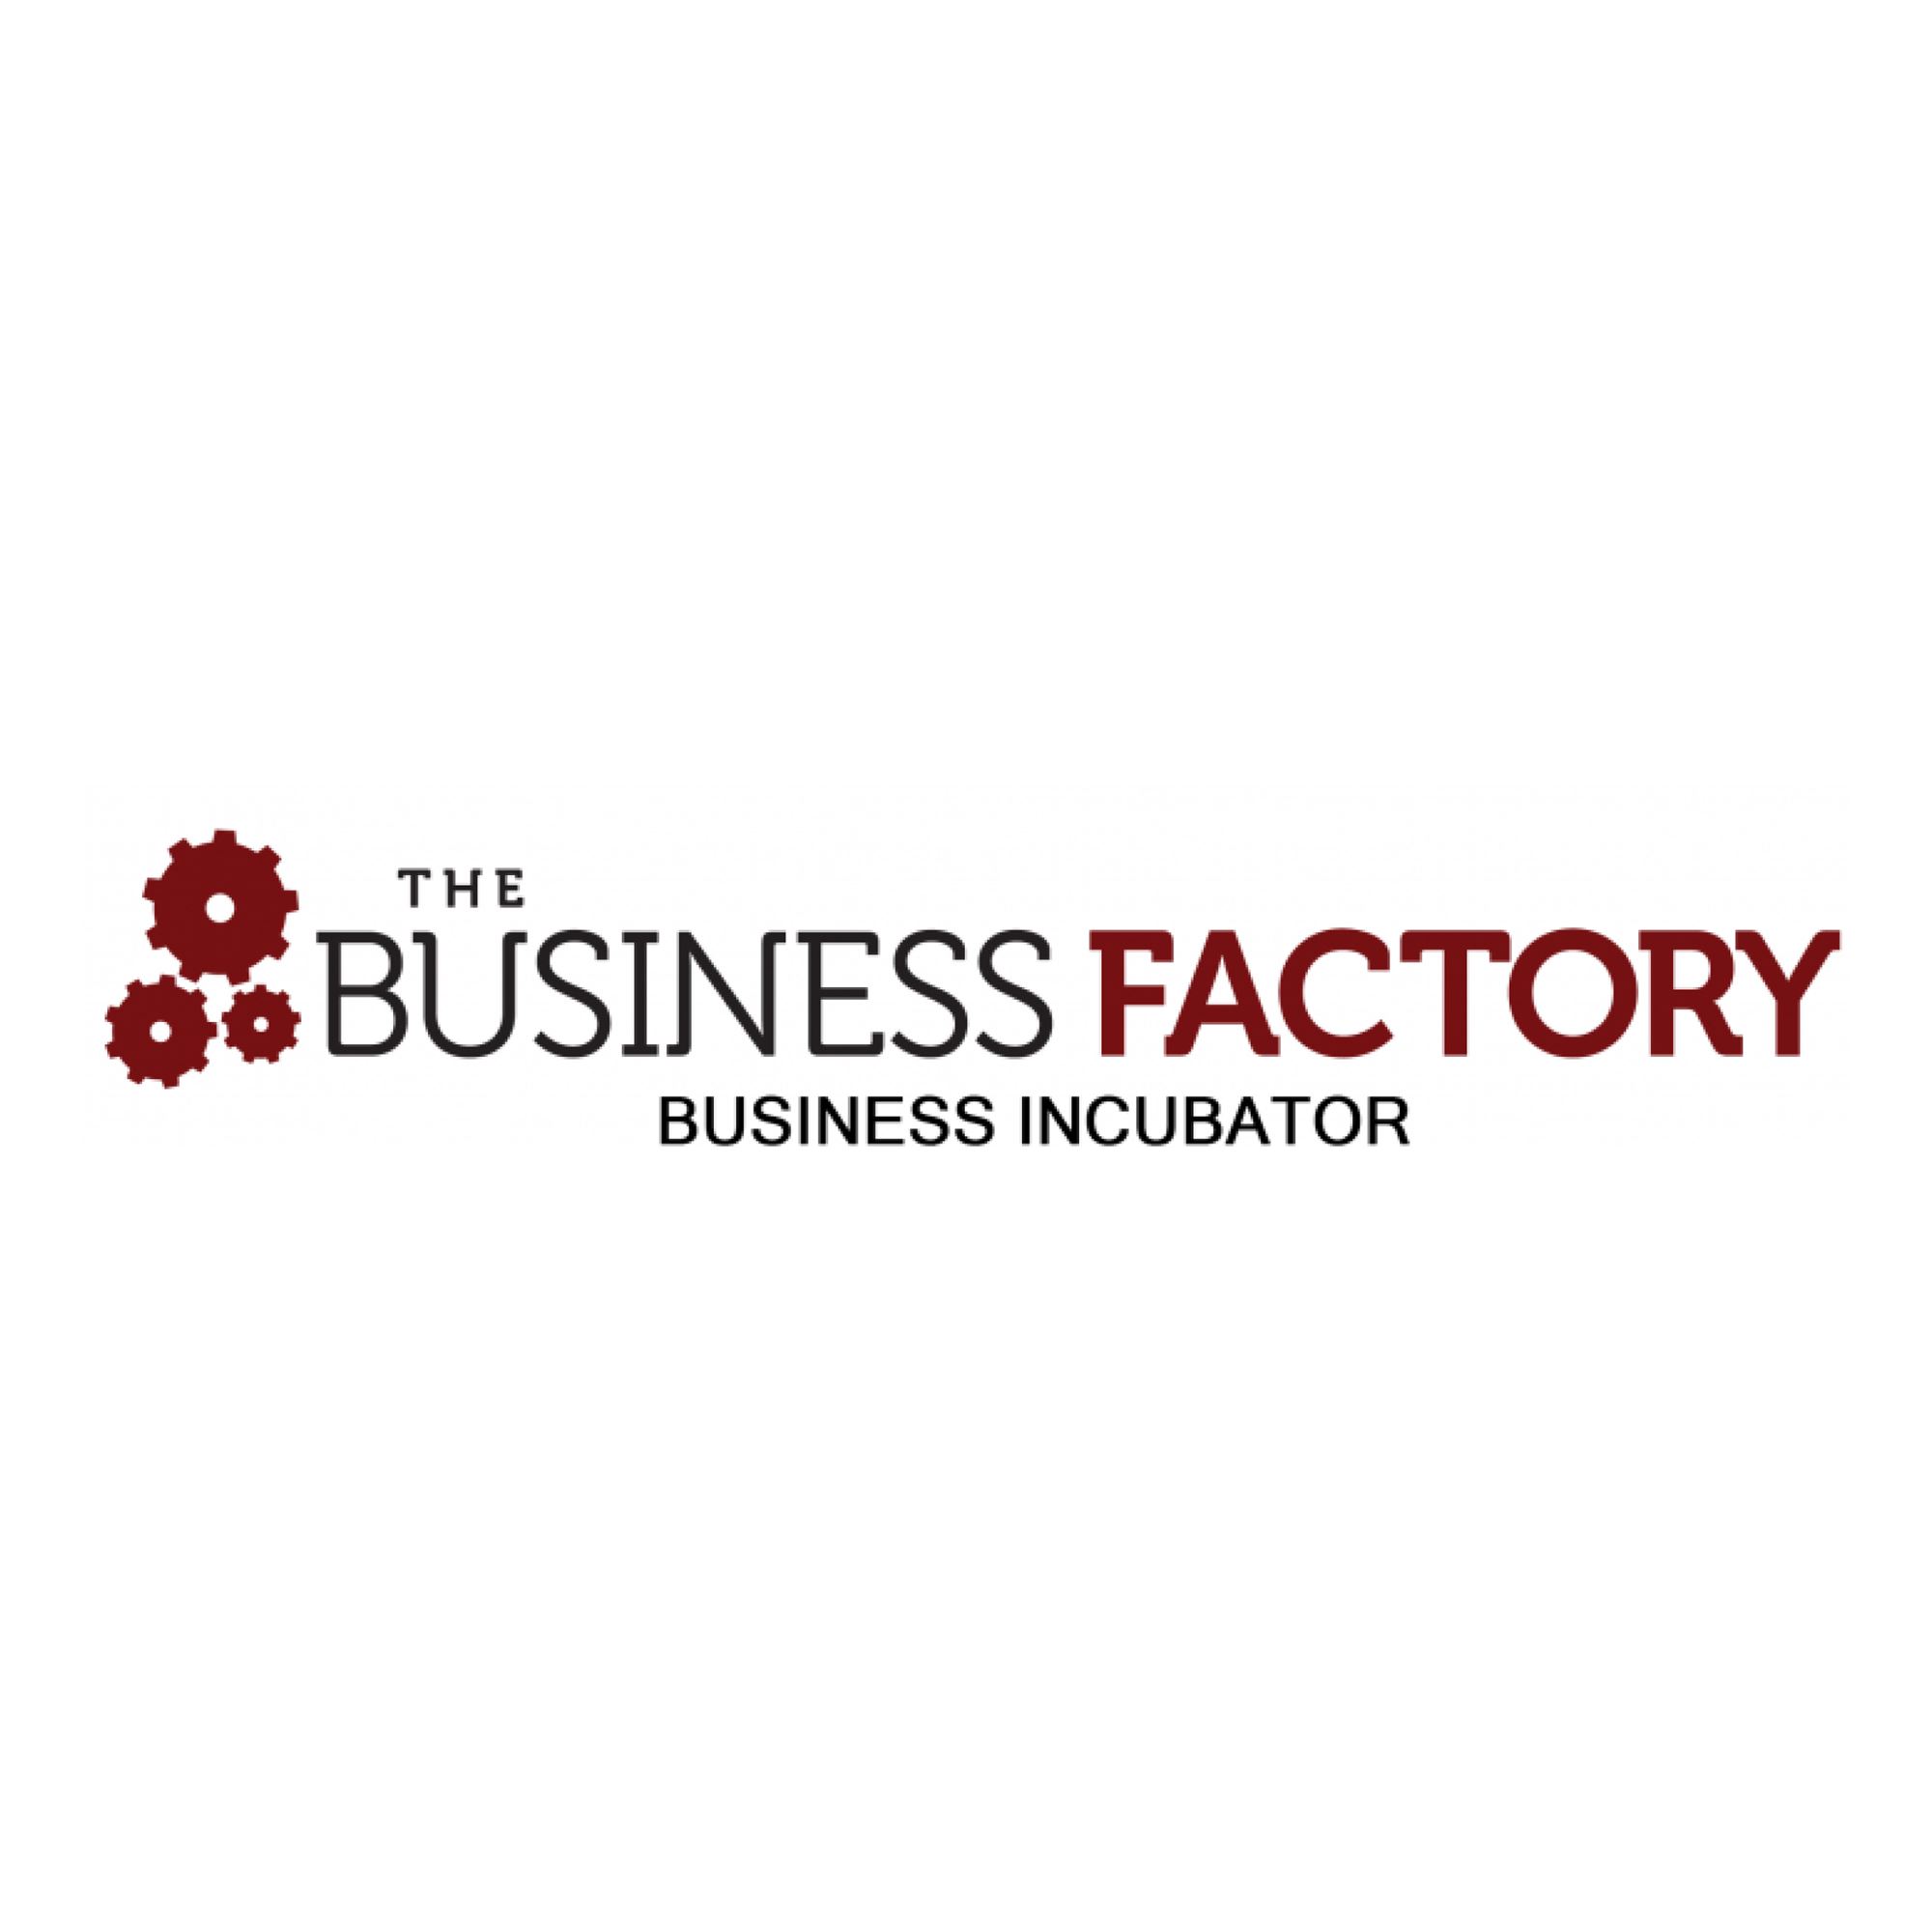 The Business Factory - Business Incubator 